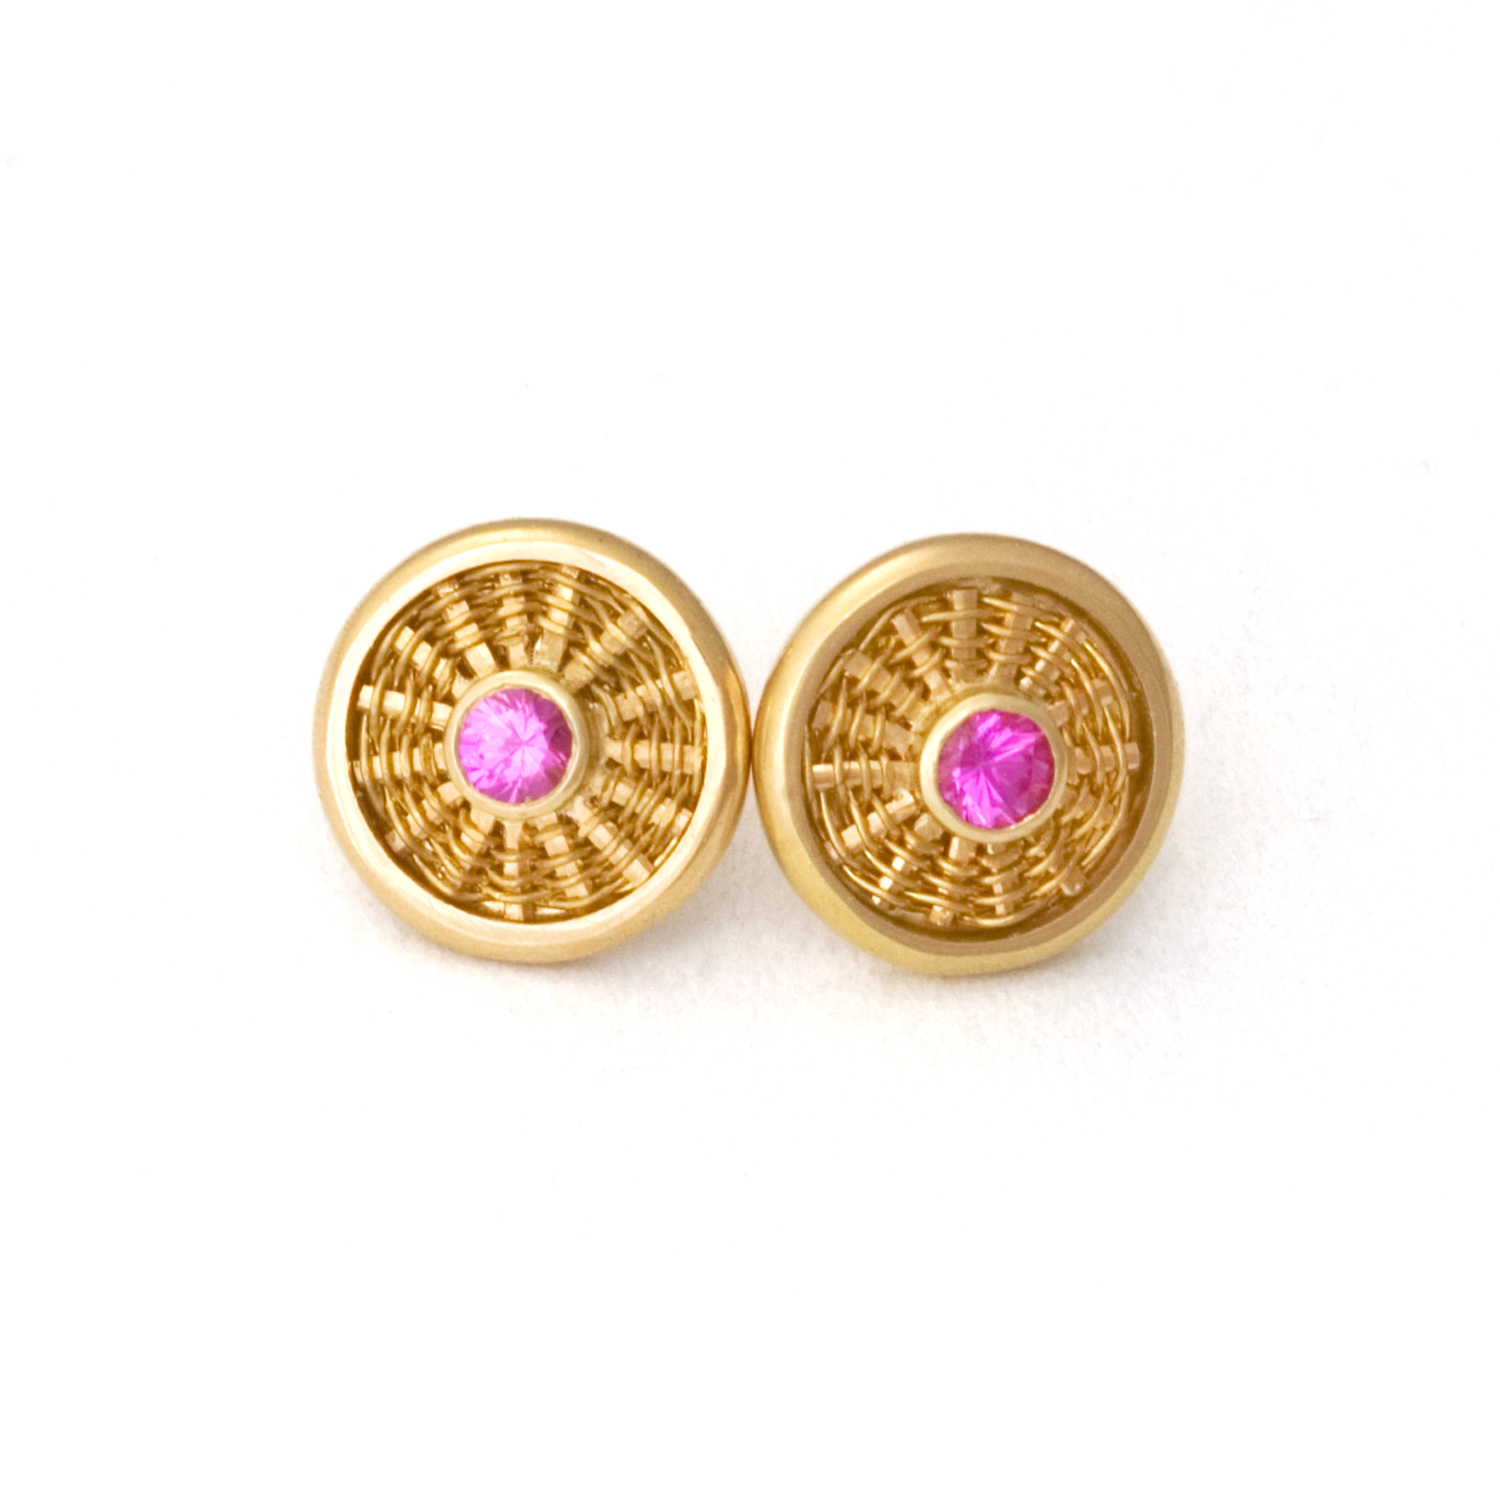 Sunburst Weave Stud Earrings in 18k gold with pink sapphire by Tamberlaine